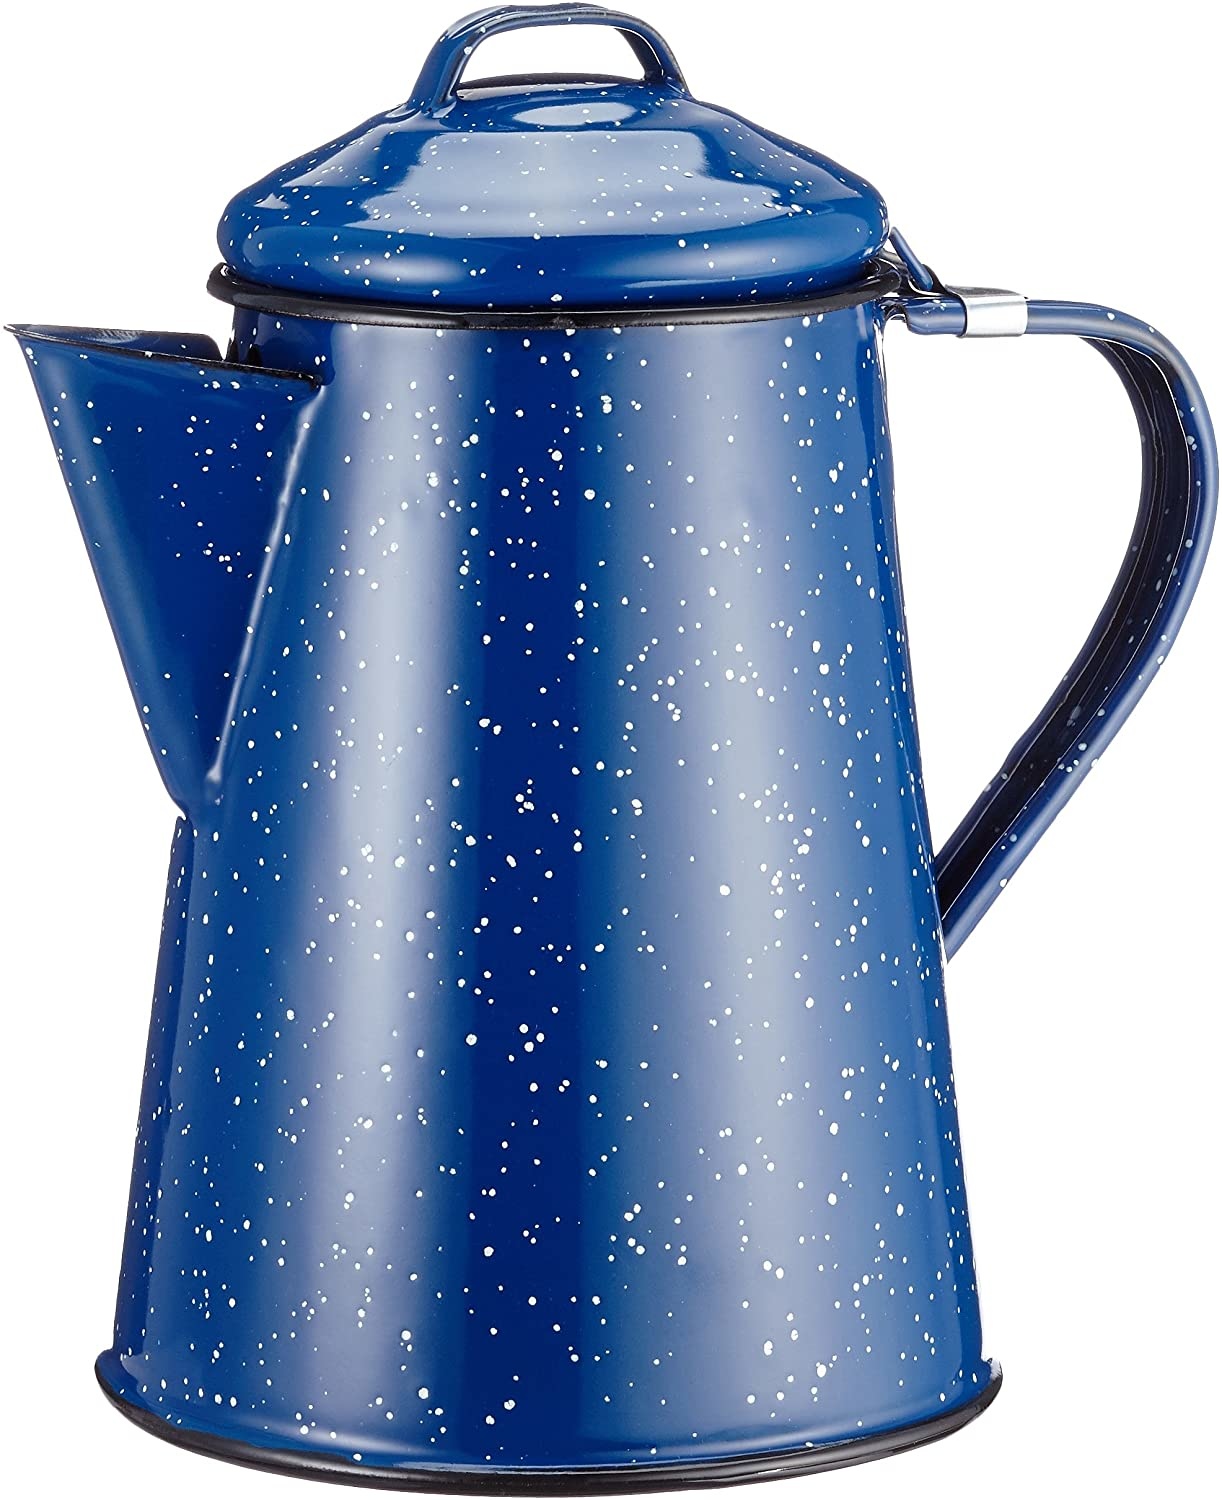 World Famous 9 Cup Blue Enamel Camping Coffee Percolator